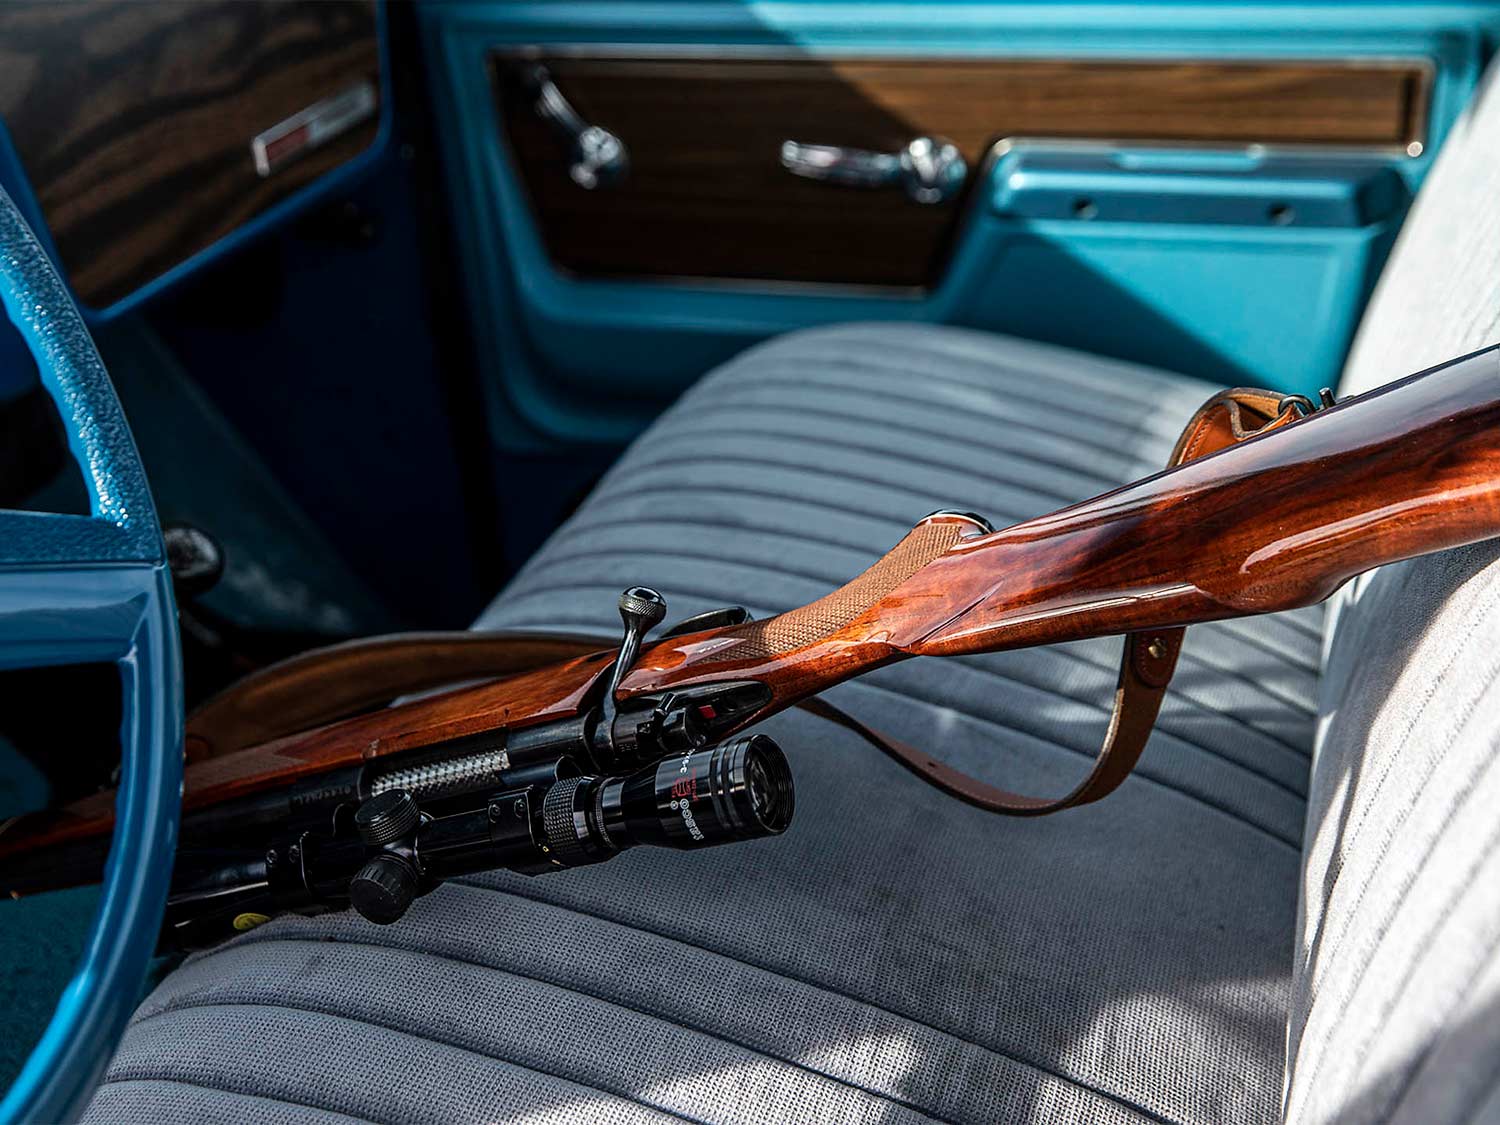 A hunting rifle is placed in the seat of a truck.